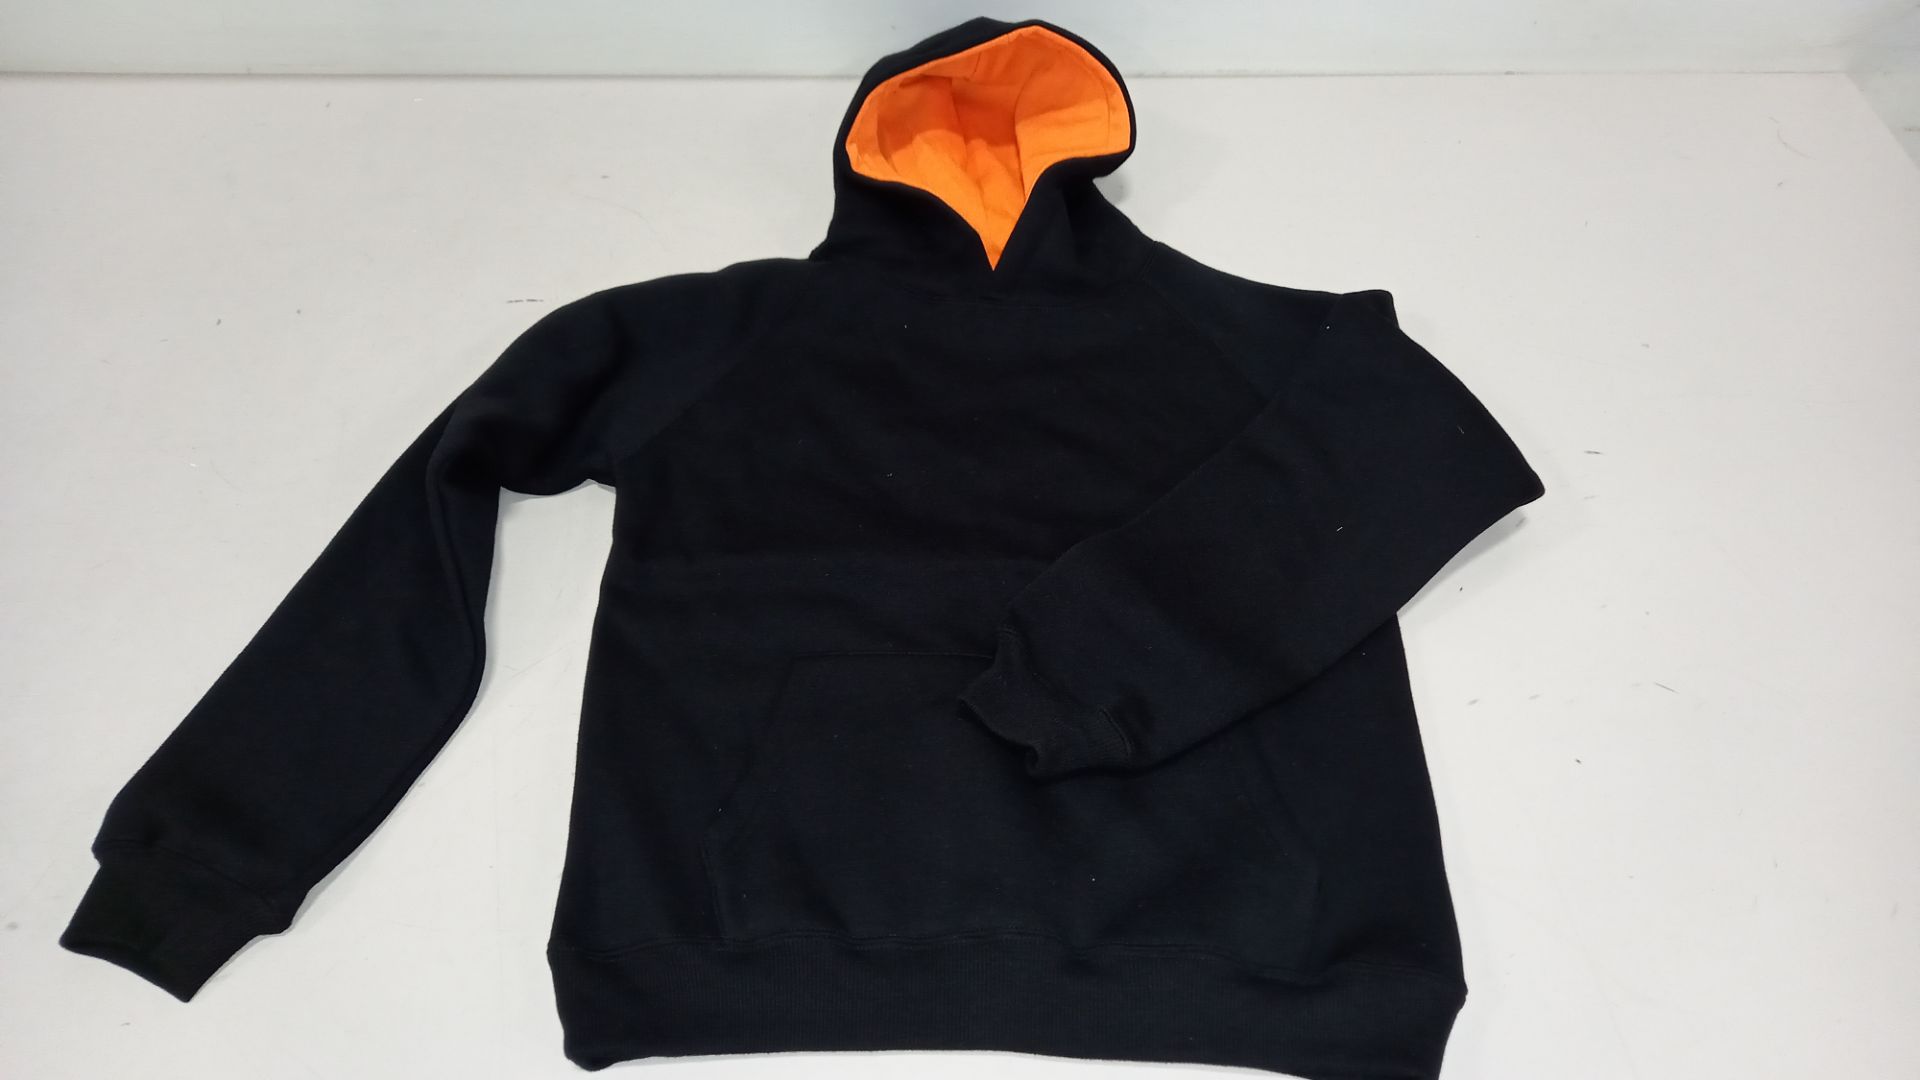 20 X BRAND NEW PANINI CHILDRENS HOODED JUMPERS IN BLACK/ ORANGE IN SIZE ( UK 11/12 )